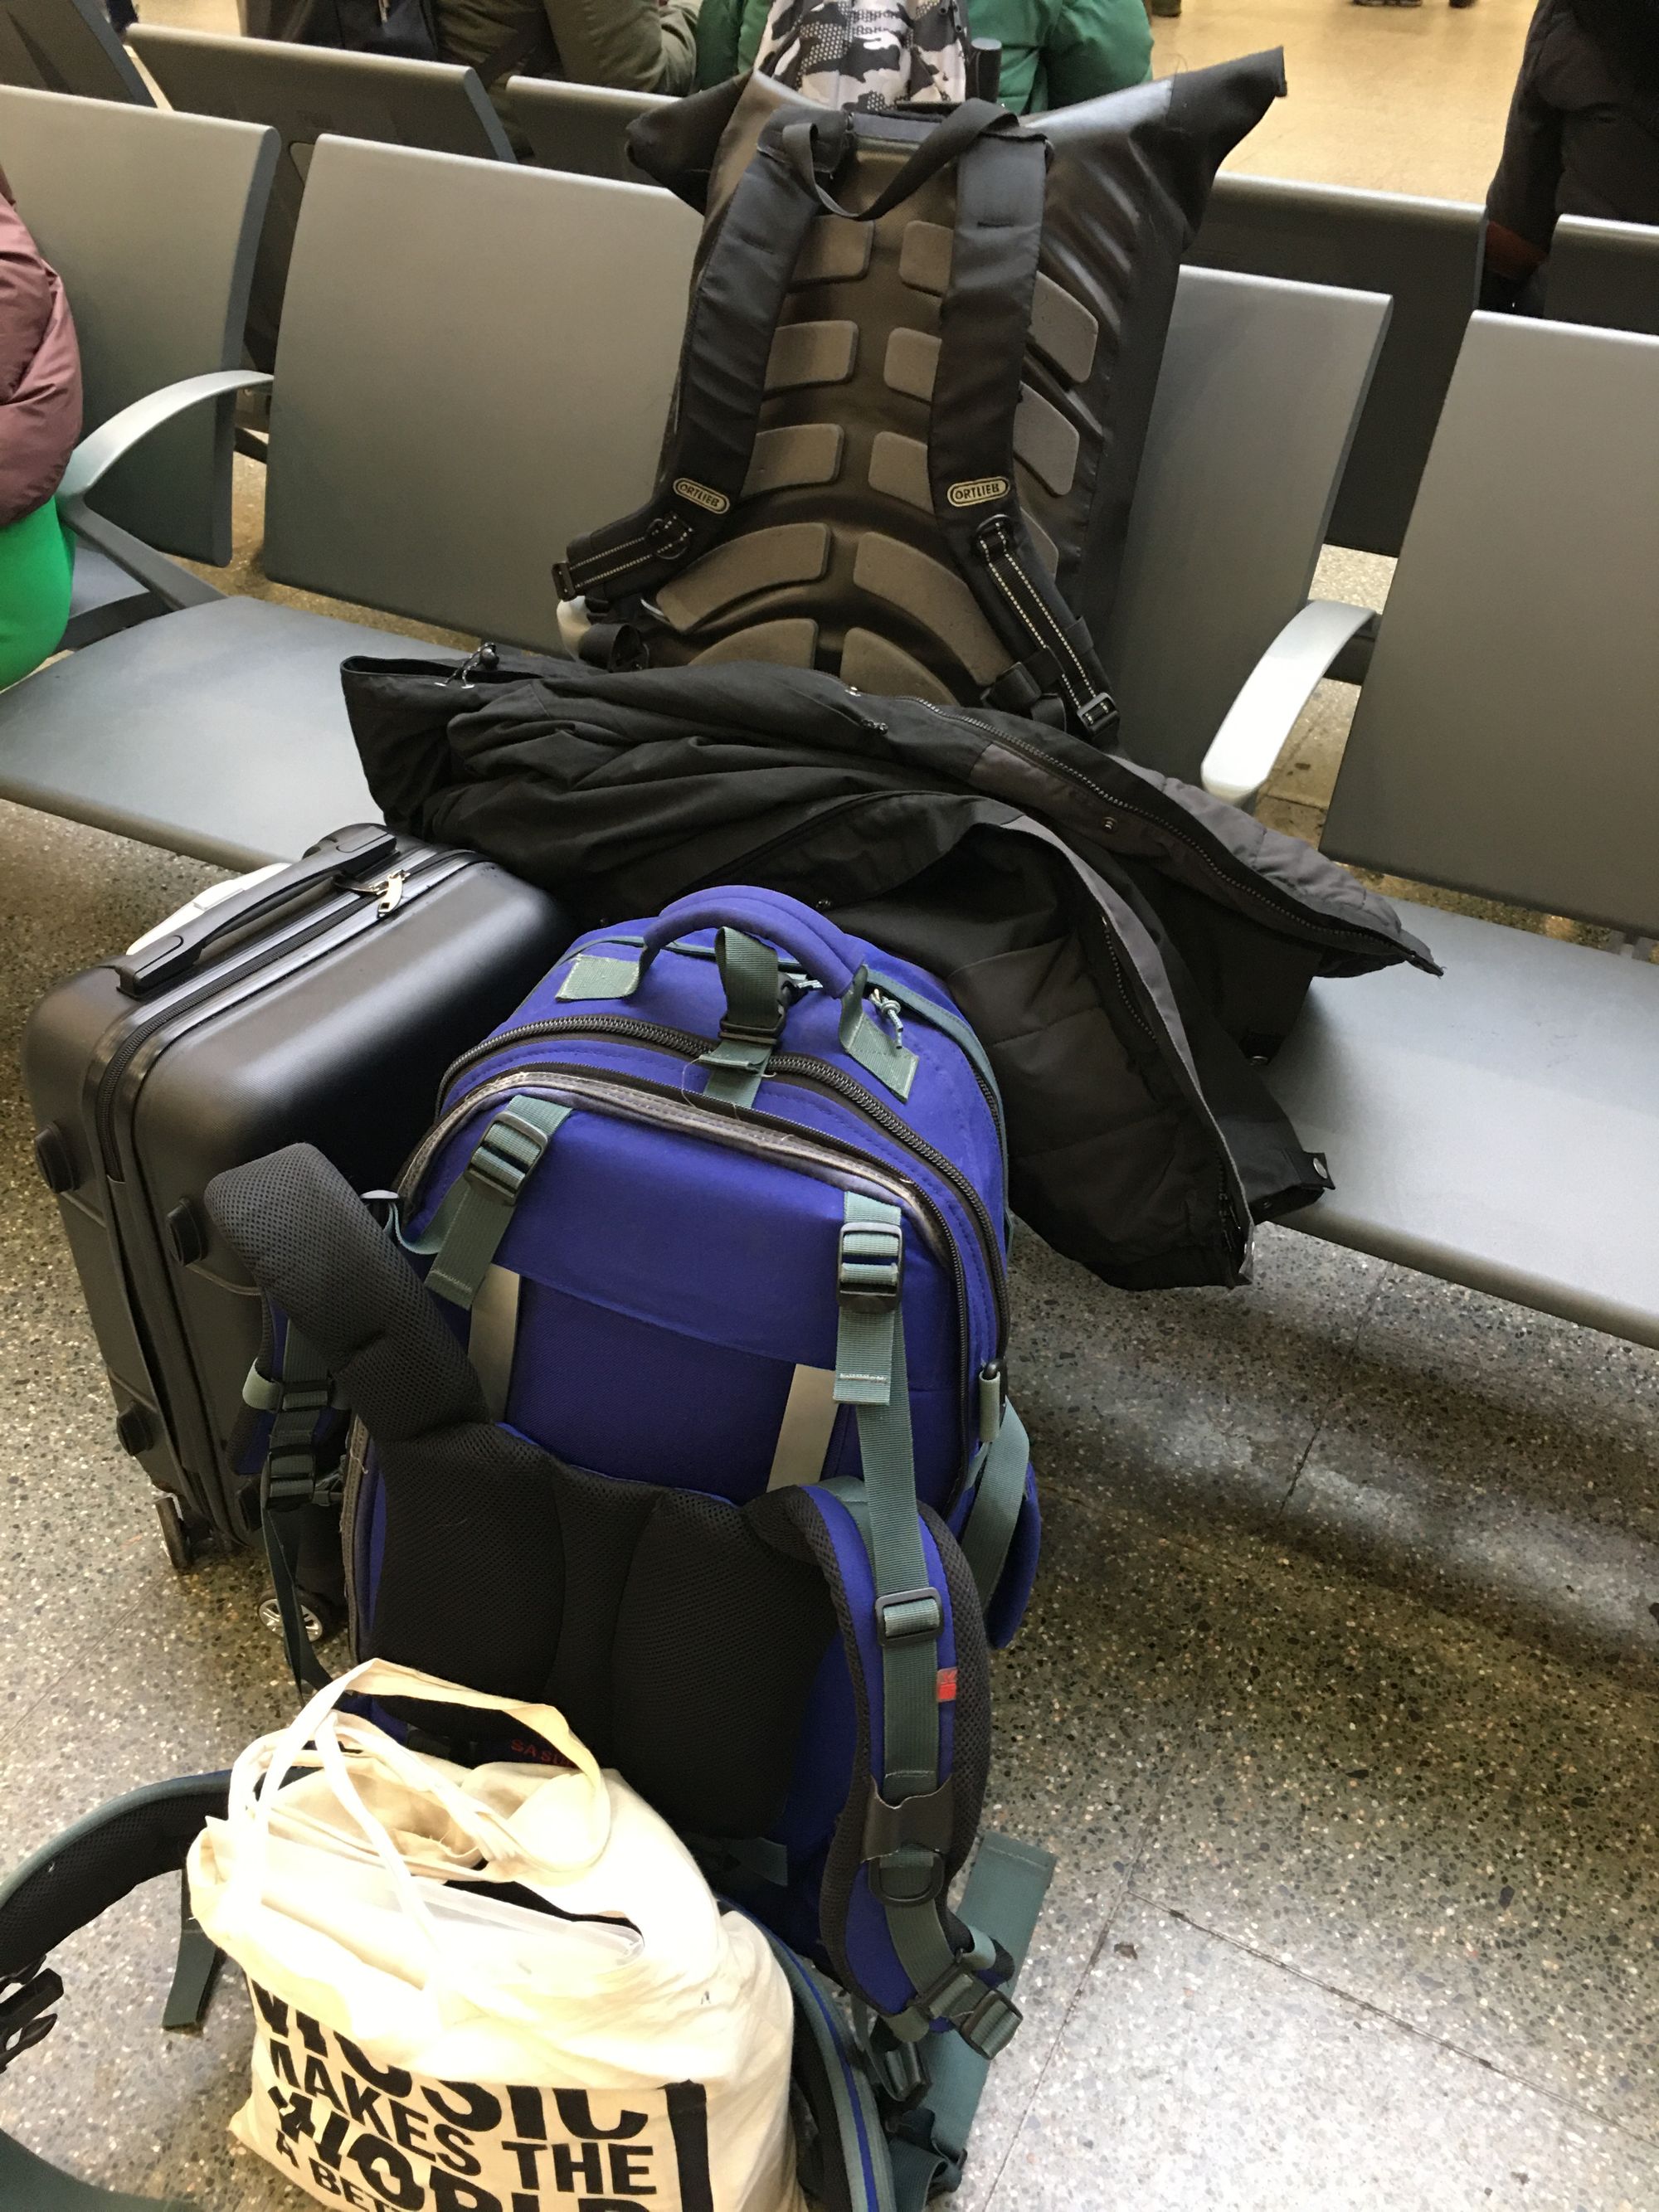 A 30 litre black waterproof bag, a large back-packing style blue rucksack, an executive black wheelie case, and a tote bag.